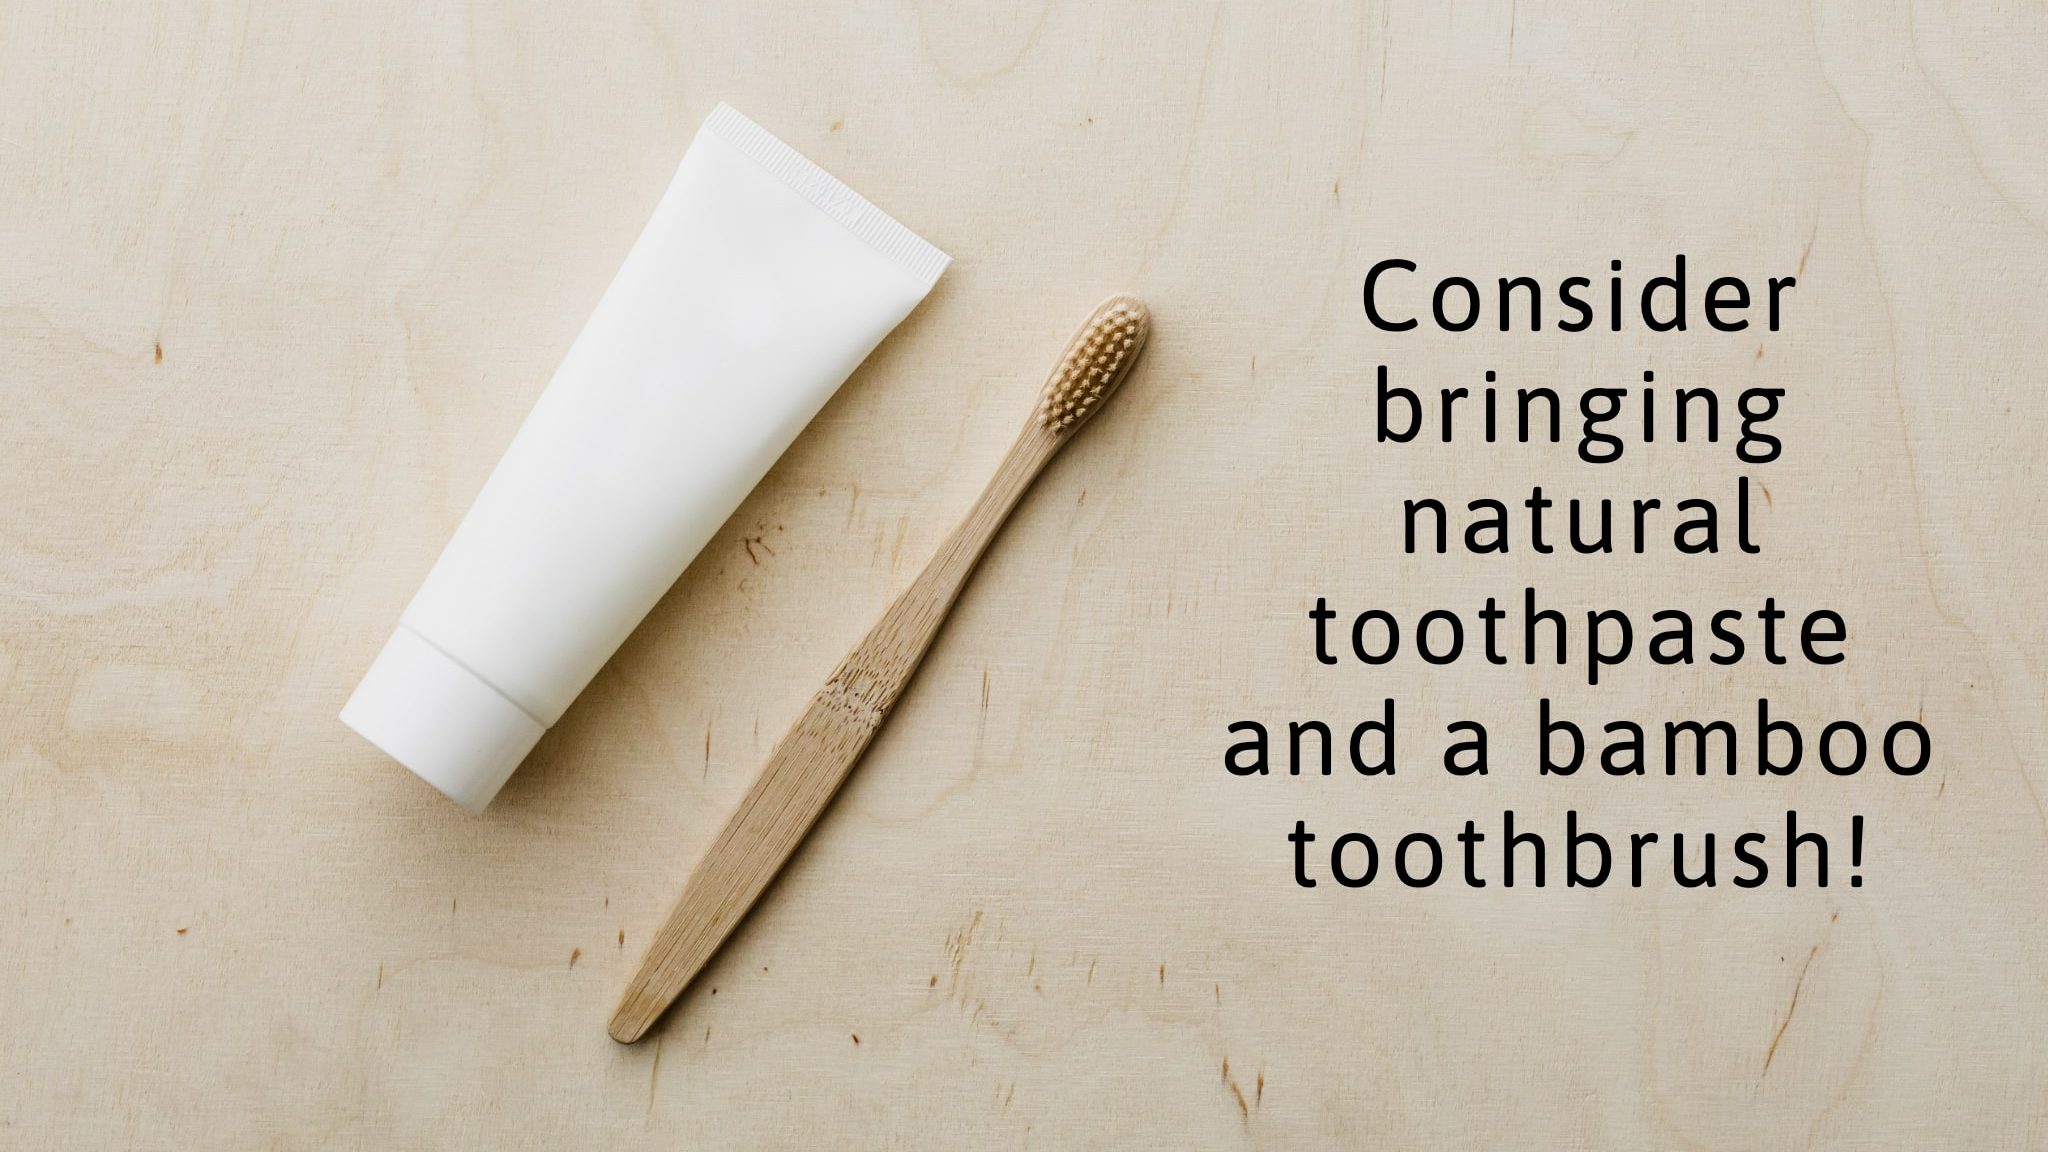 White tube of natural toothpaste pictured beside a bamboo toothbrush on a clean wooden surface. Image text reads "consider bringing natural toothpaste and a bamboo toothbrush!"